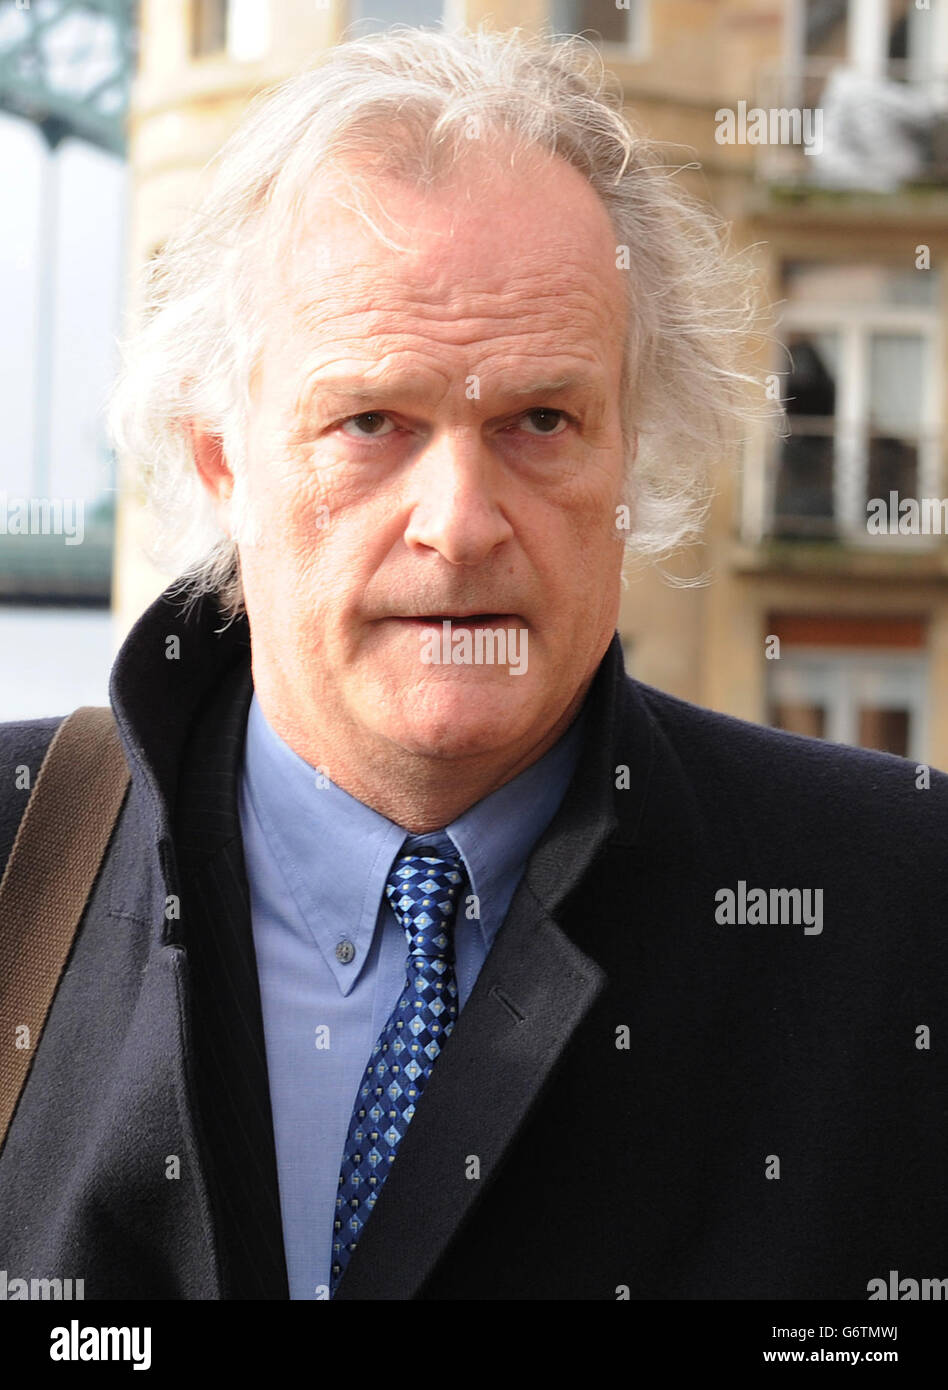 Former Casualty actor Clive Mantle arrives at Newcastle Crown Court to give evidence in the trial of Philip McGilvray, 33, and Alan French, 32, who are accused of attacking the actor and biting off part of his ear leaving him with a permanent disfigurement. Stock Photo